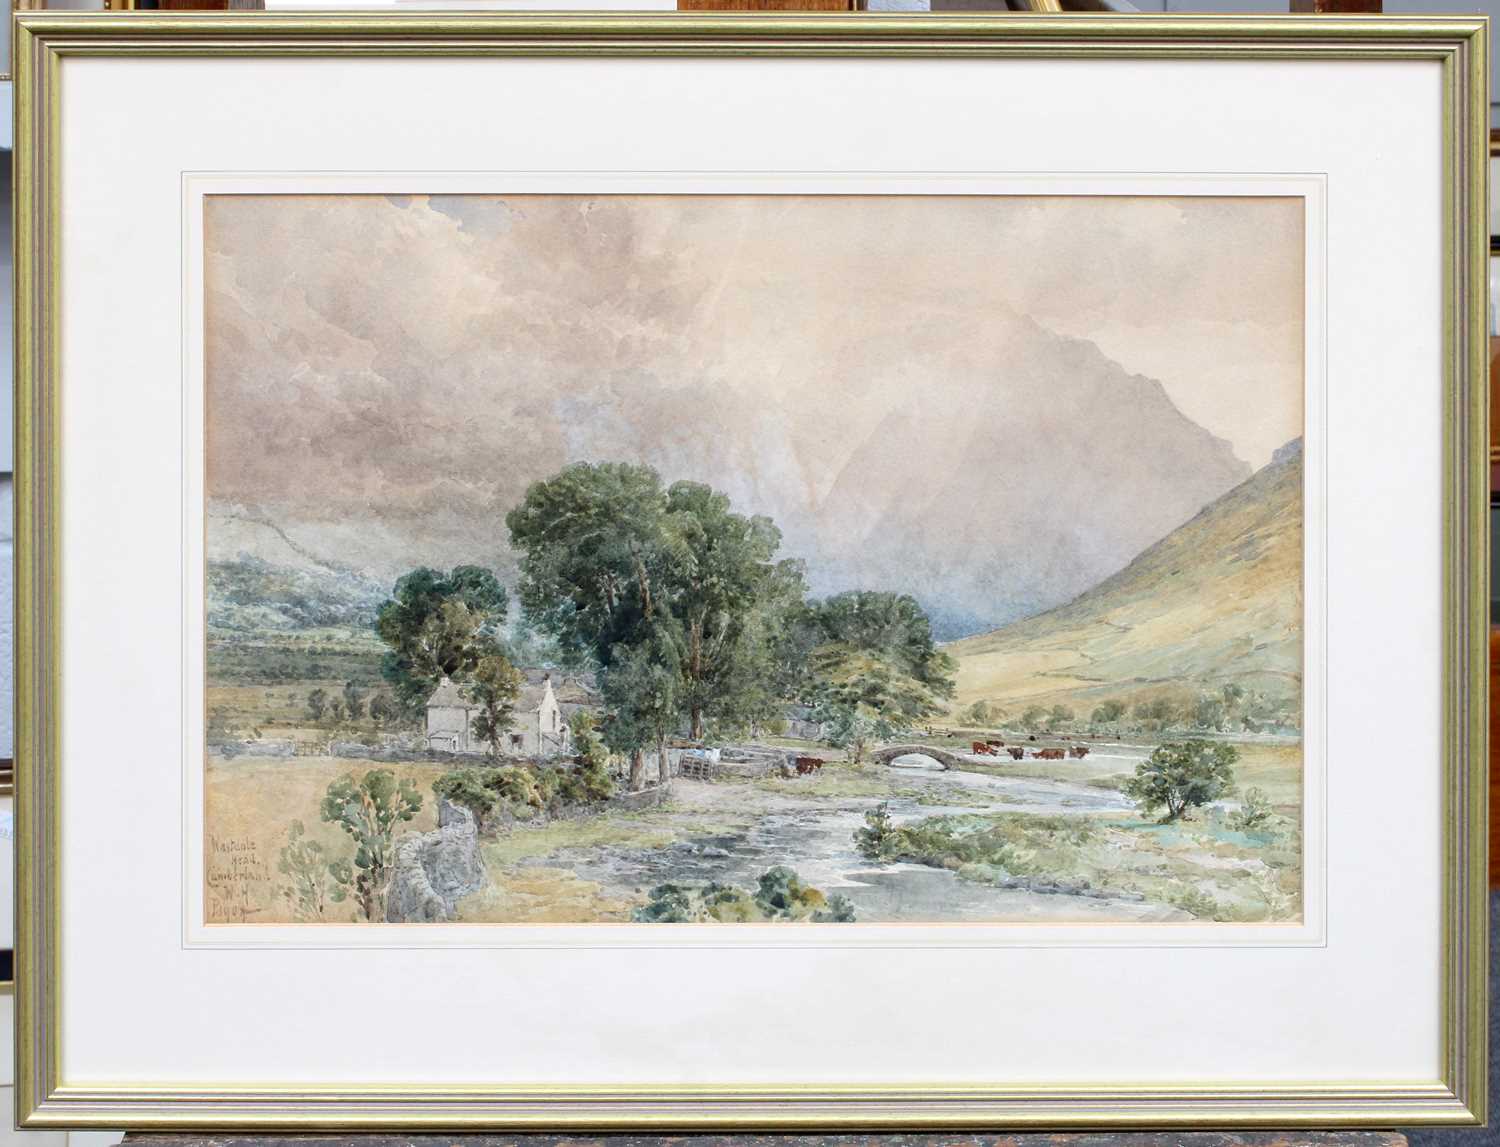 William Henry Pigott (1810-1901) "Winhill Derbyshire" Signed, inscribed and dated (18)86, - Image 4 of 4